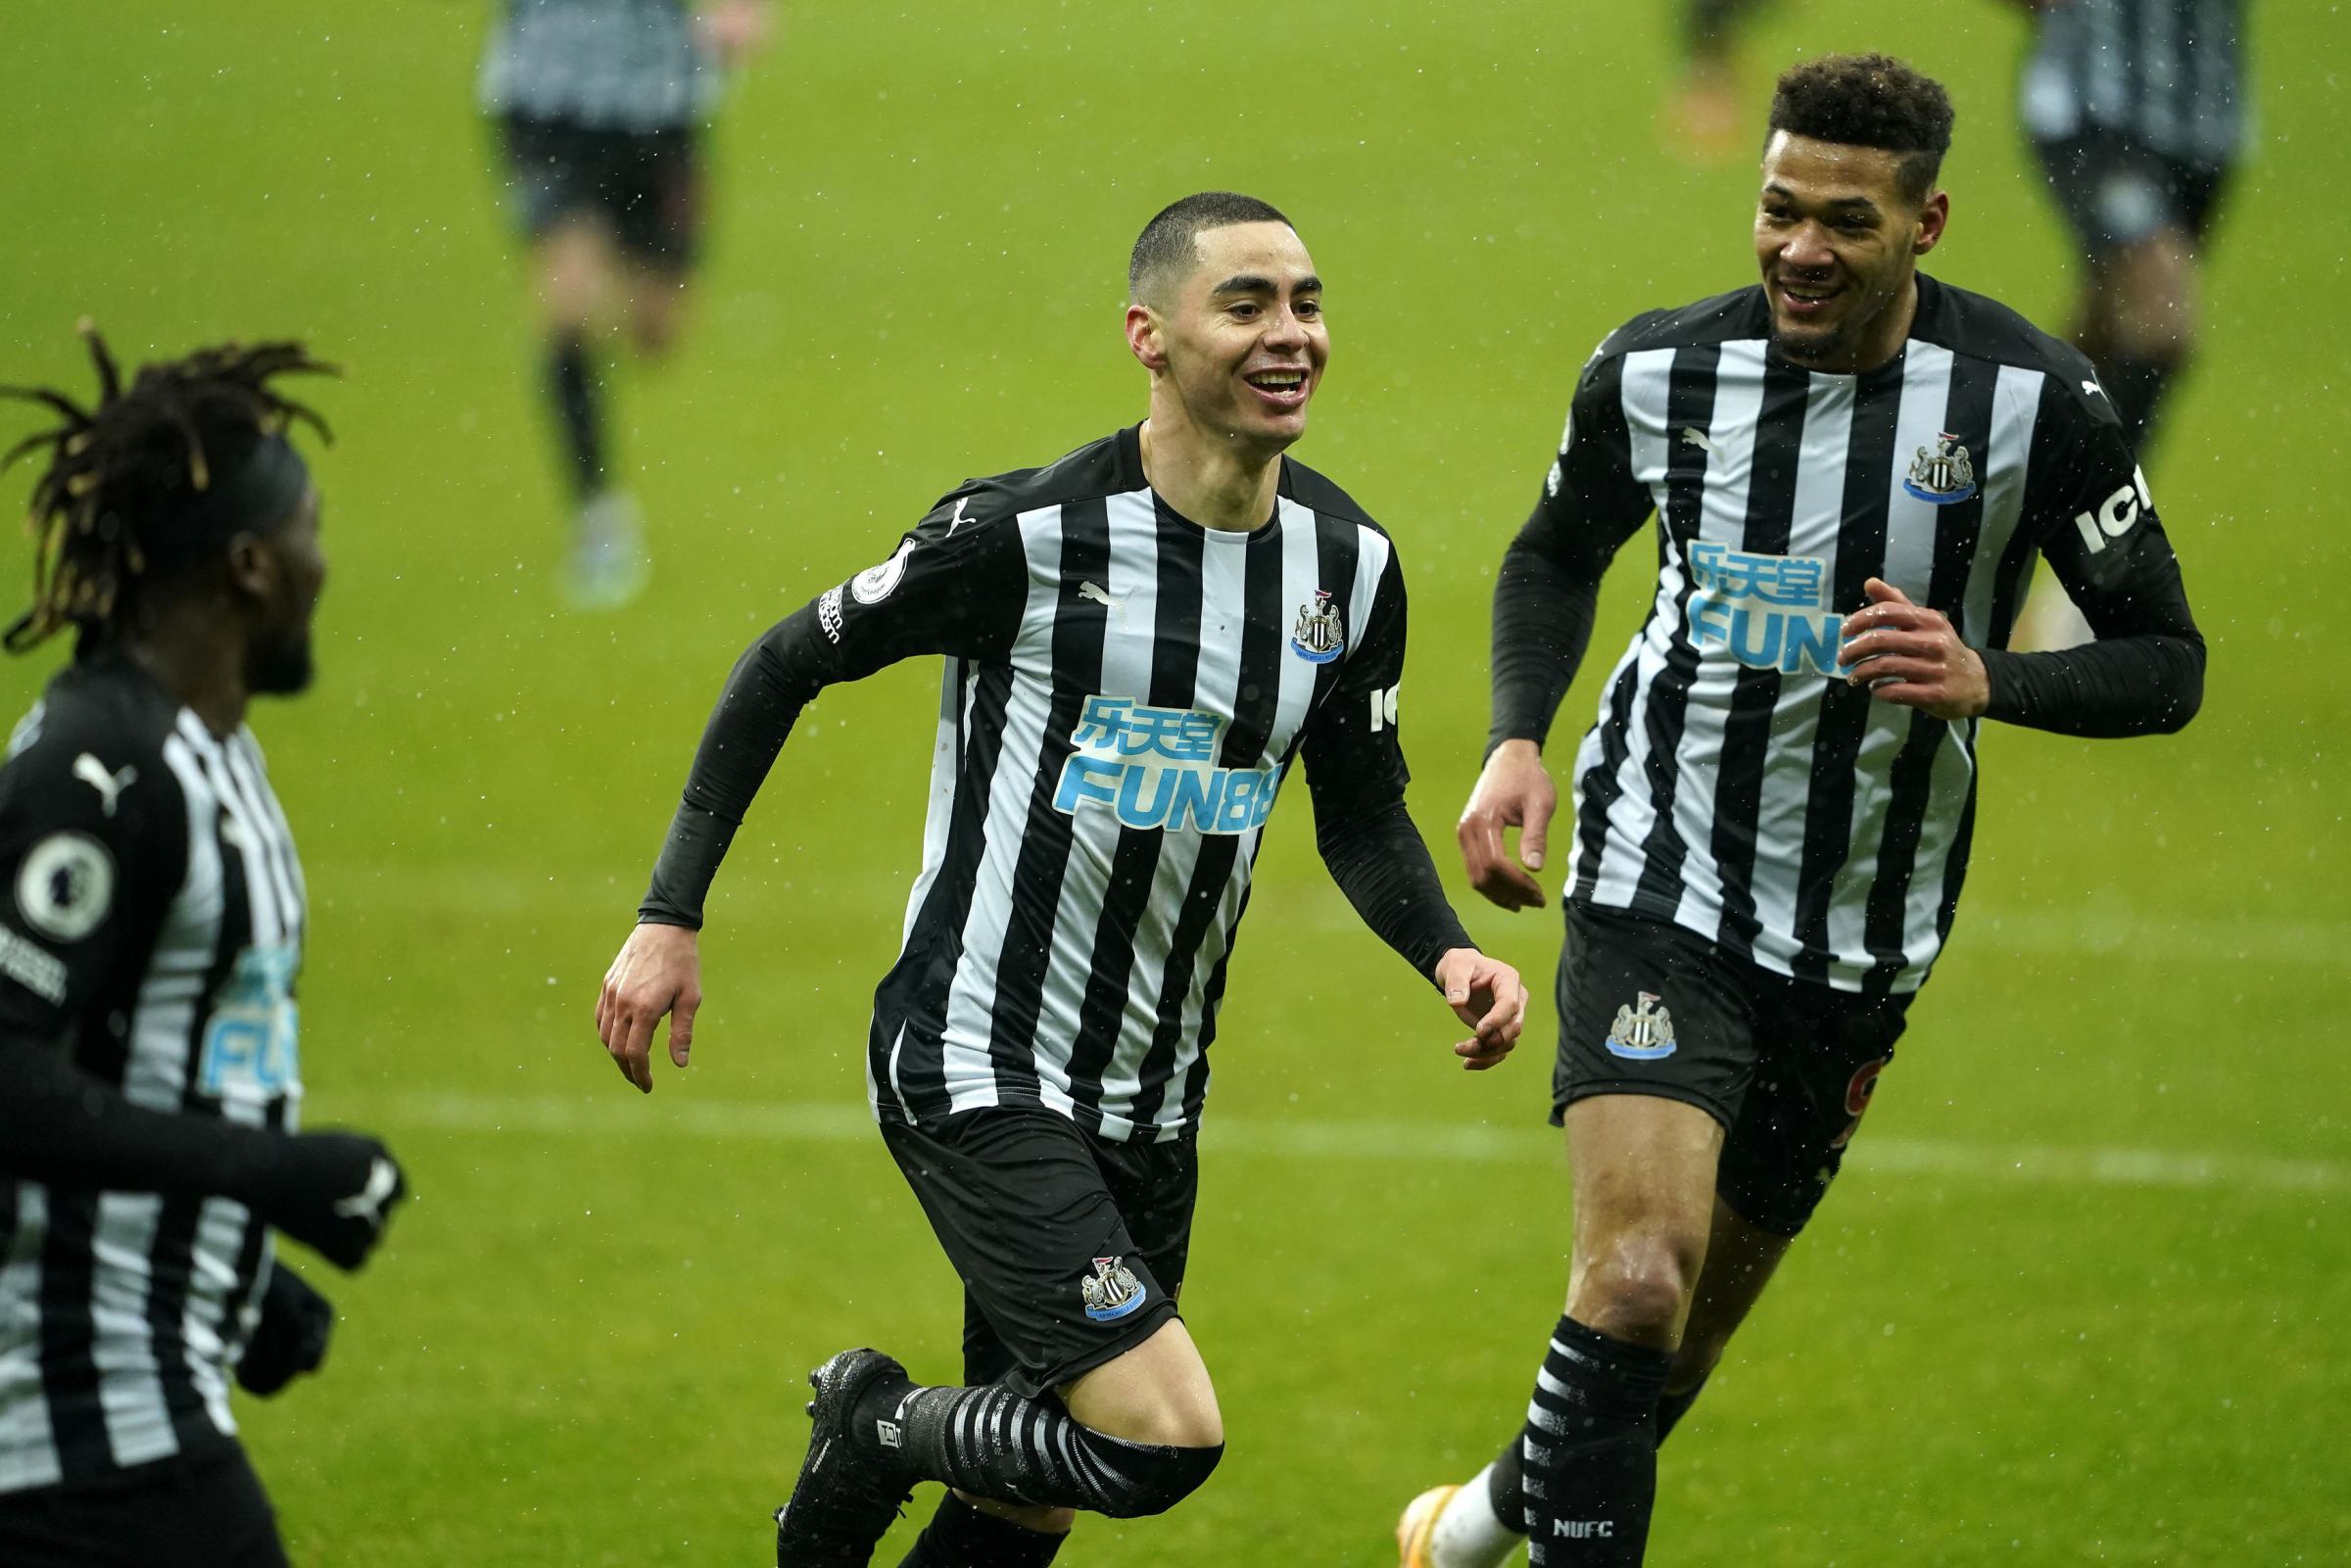 Saints suffer another defeat - despite Newcastle finishing with nine men